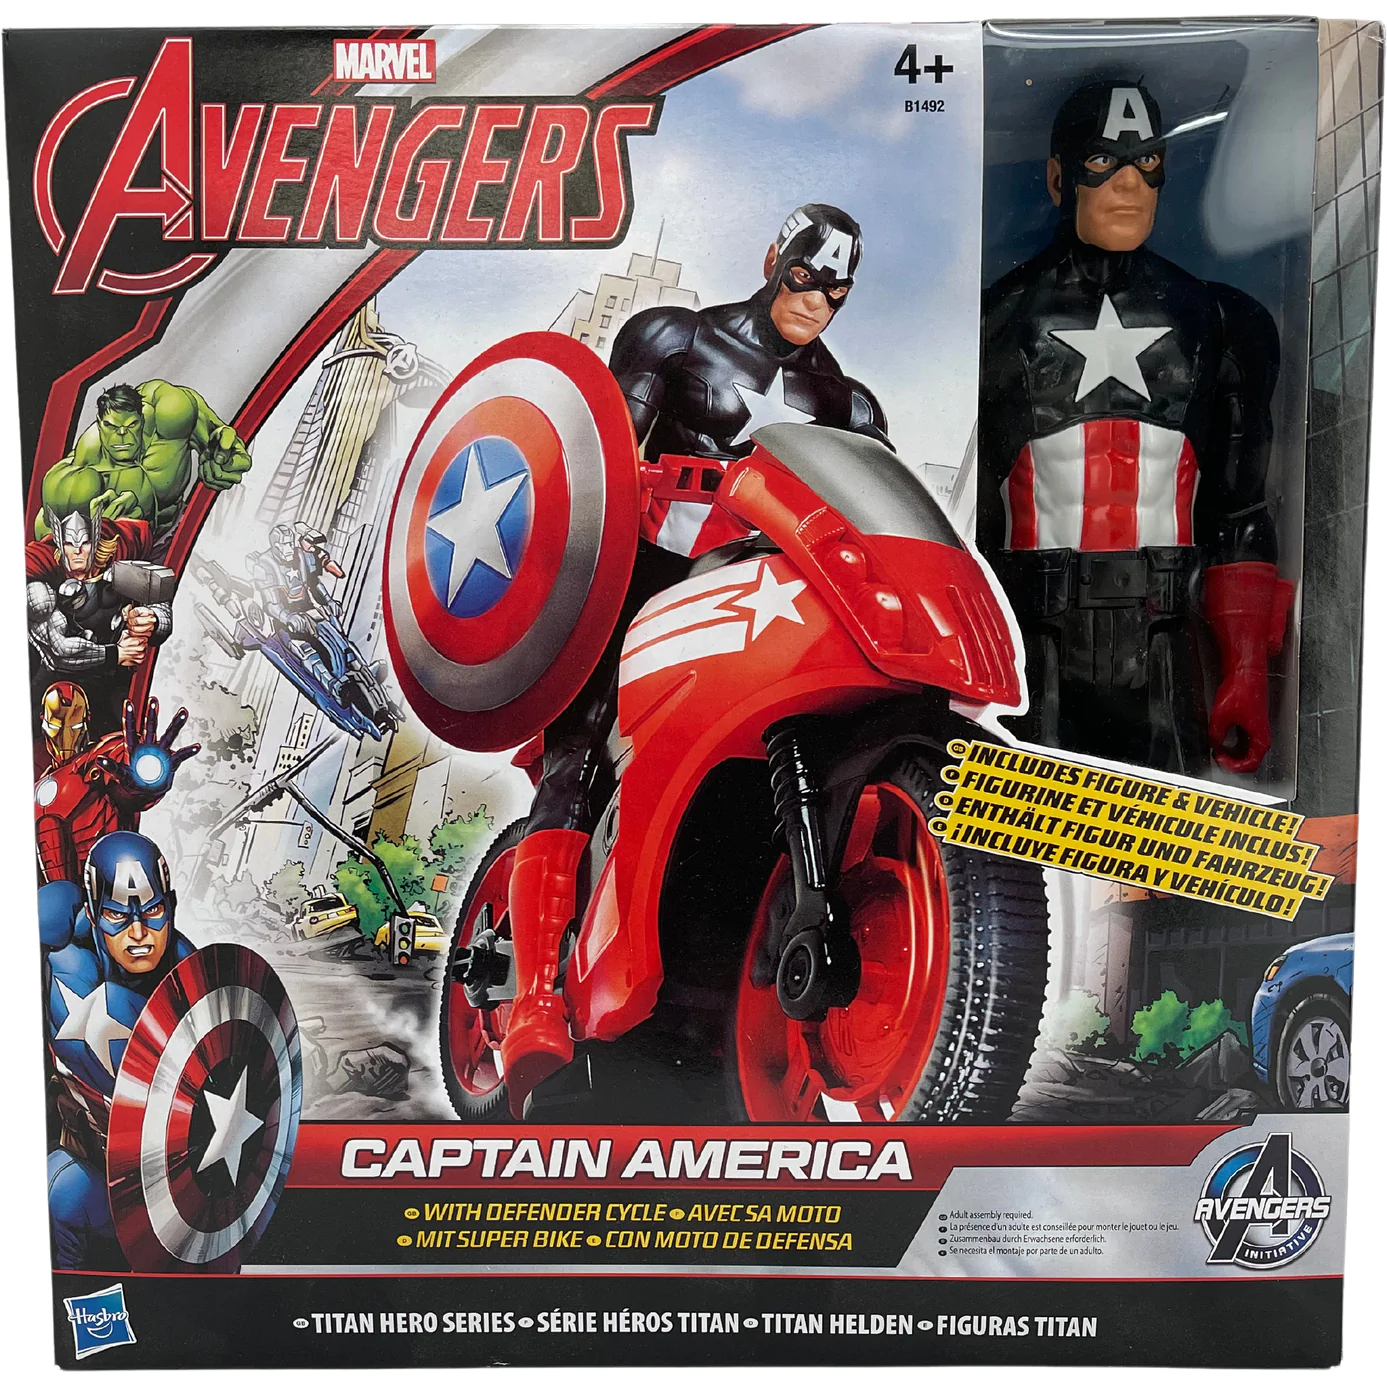 Marvel Avengers Captain America Play Set / Captain America with Defender Cycle / Titan Hero Series / Black & Red